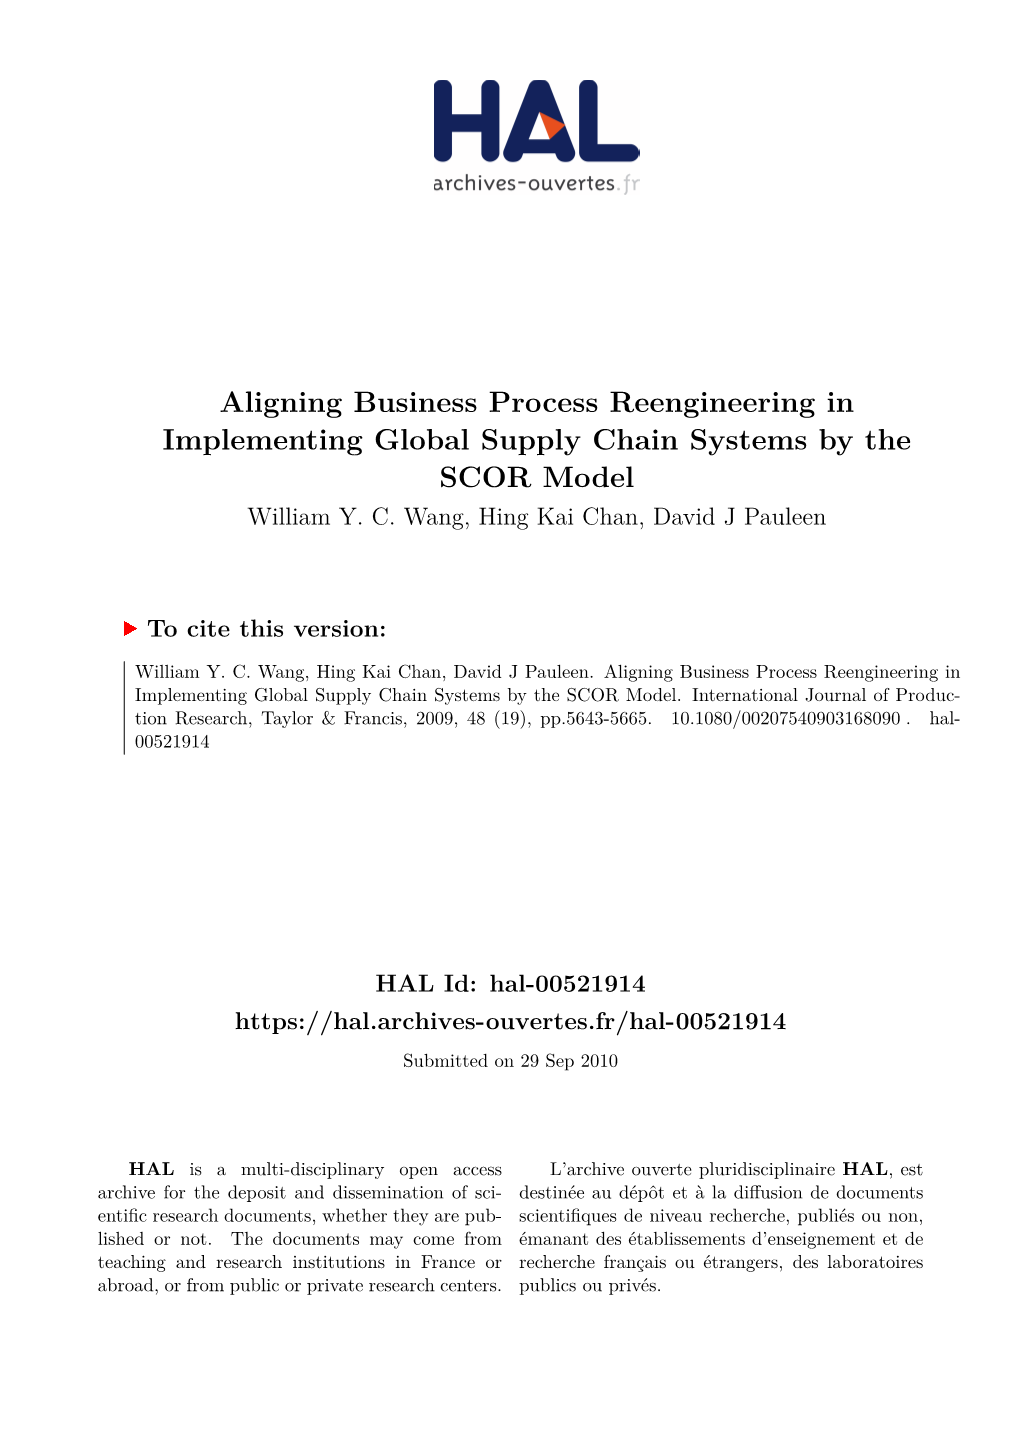 Aligning Business Process Reengineering in Implementing Global Supply Chain Systems by the SCOR Model William Y